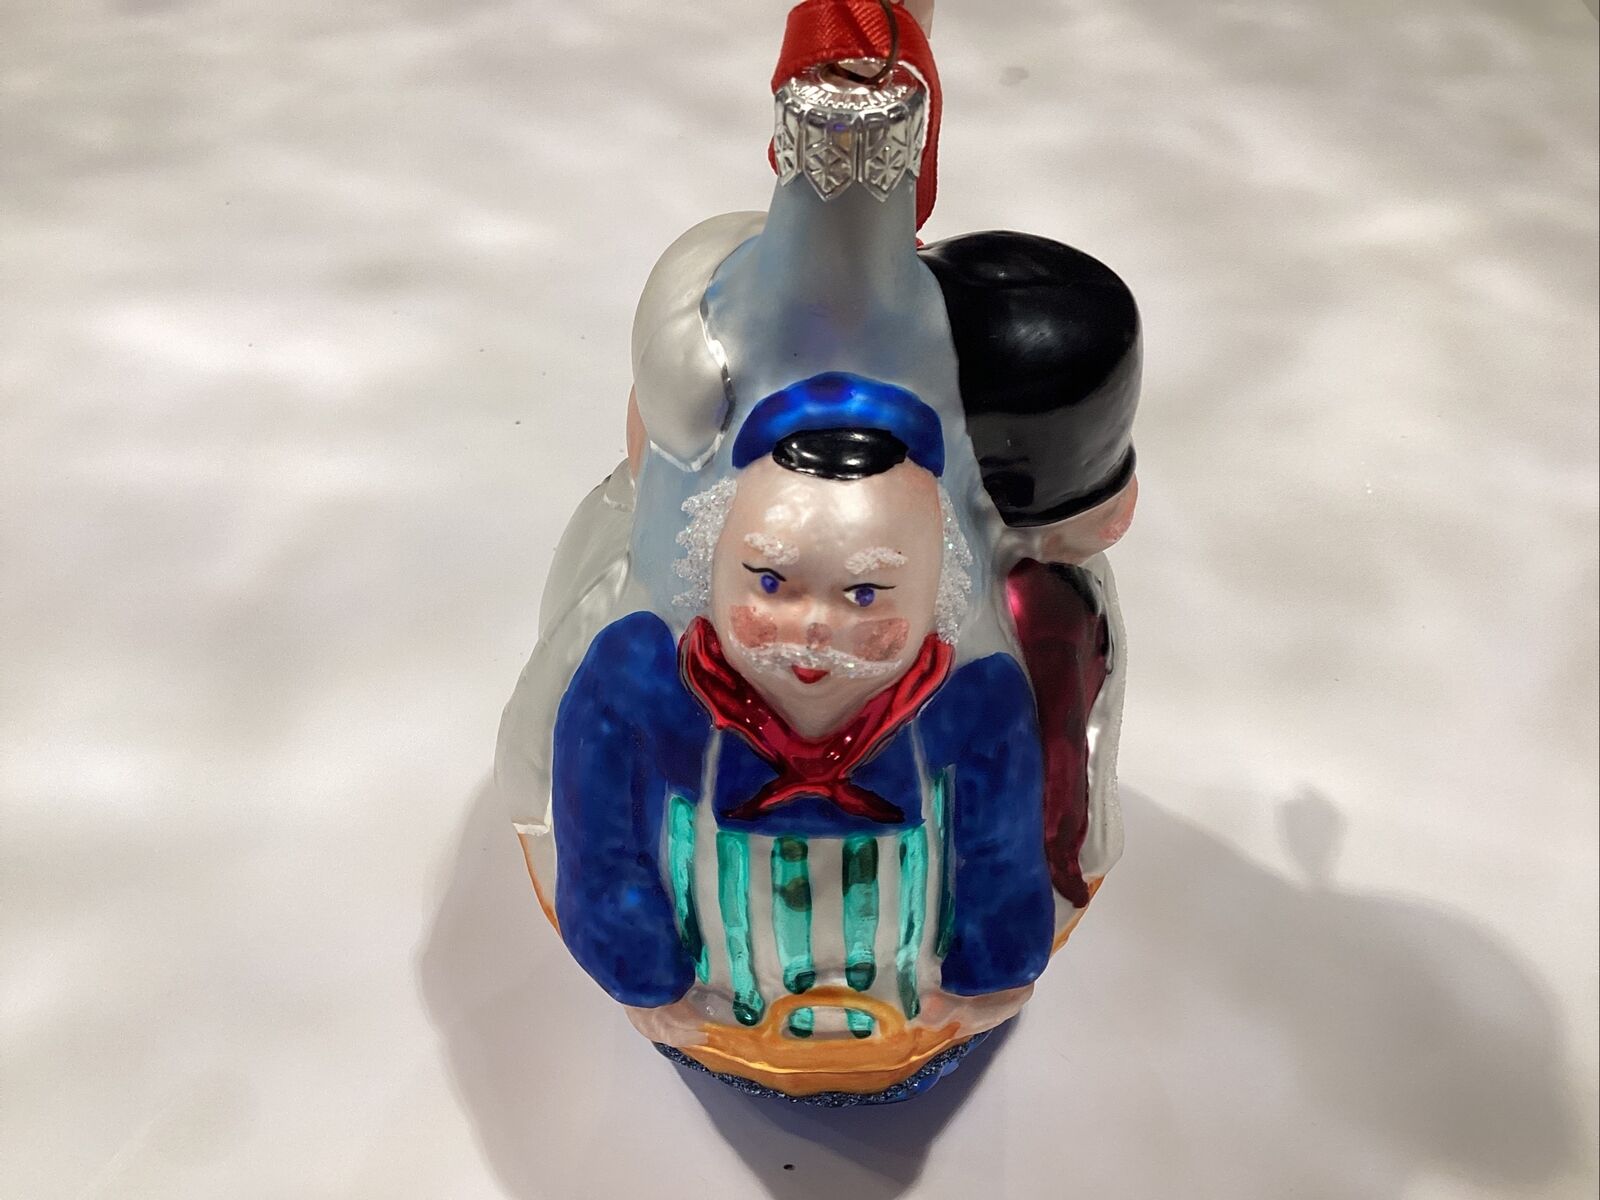 “Three Men In A Tub” Blown Glass Christmas Ornament Made In Poland 551/10,000